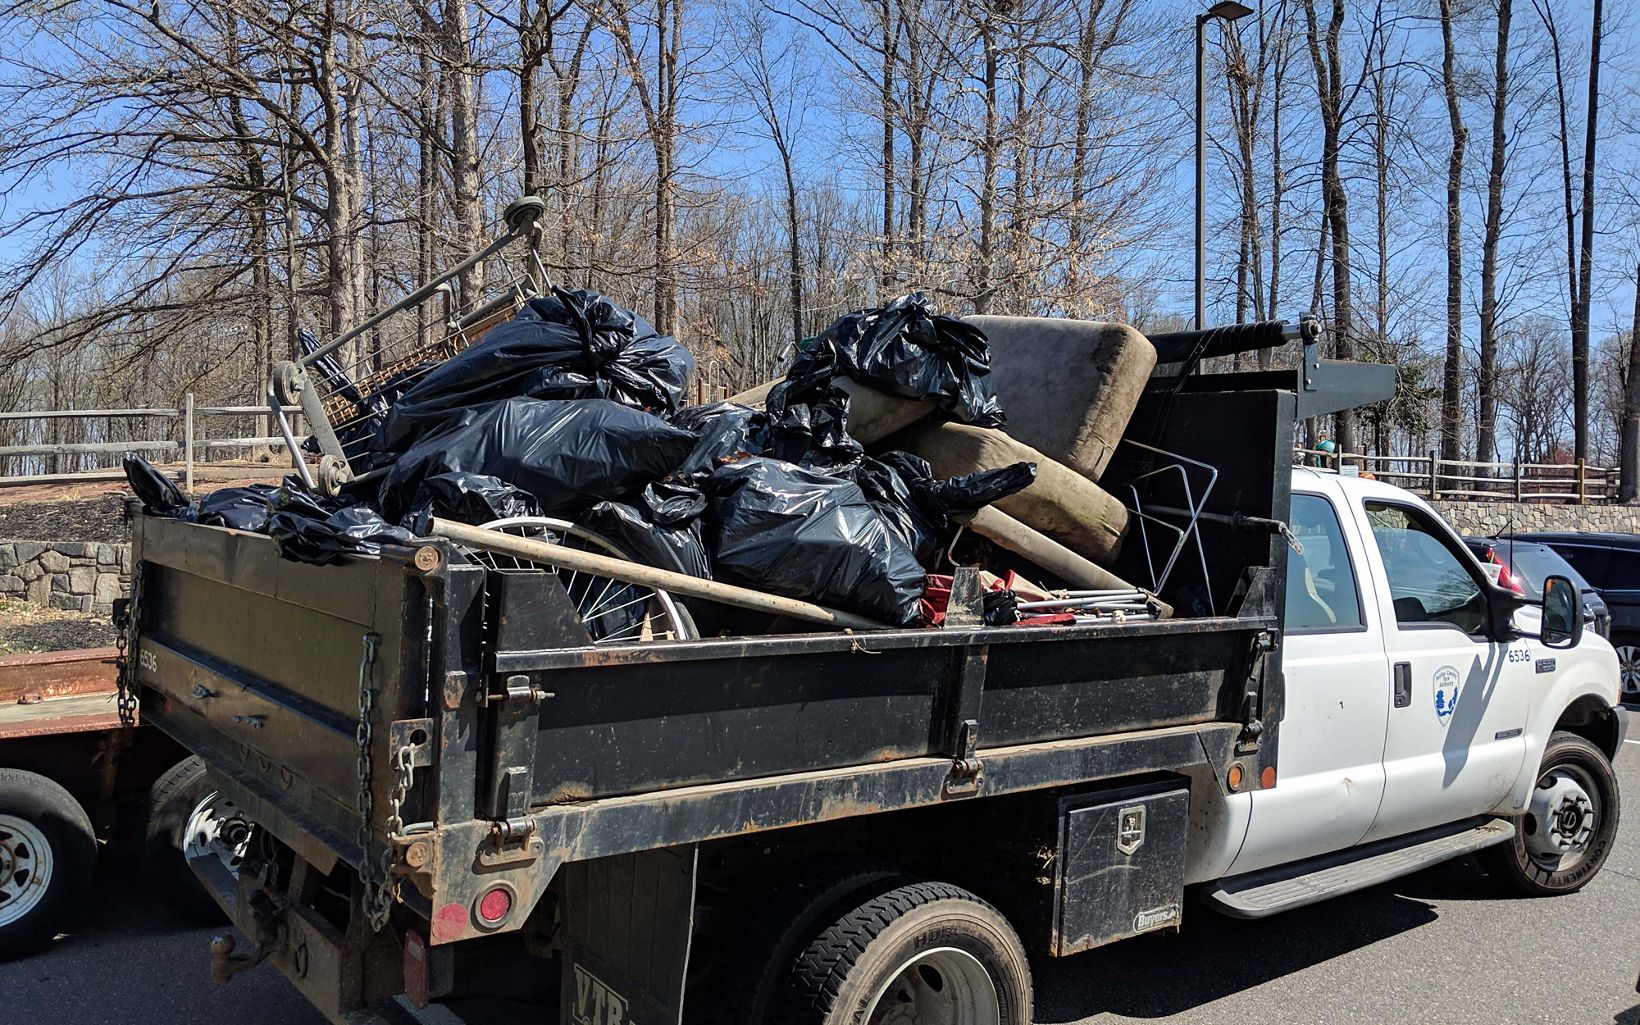 
                
                  Fairfax County Cleanup 2019 A couch, Safeway shopping cart and bikes were the larger ticket items collected at Ossian Hall Park.
                  © Megan Whatton / TNC
                
              